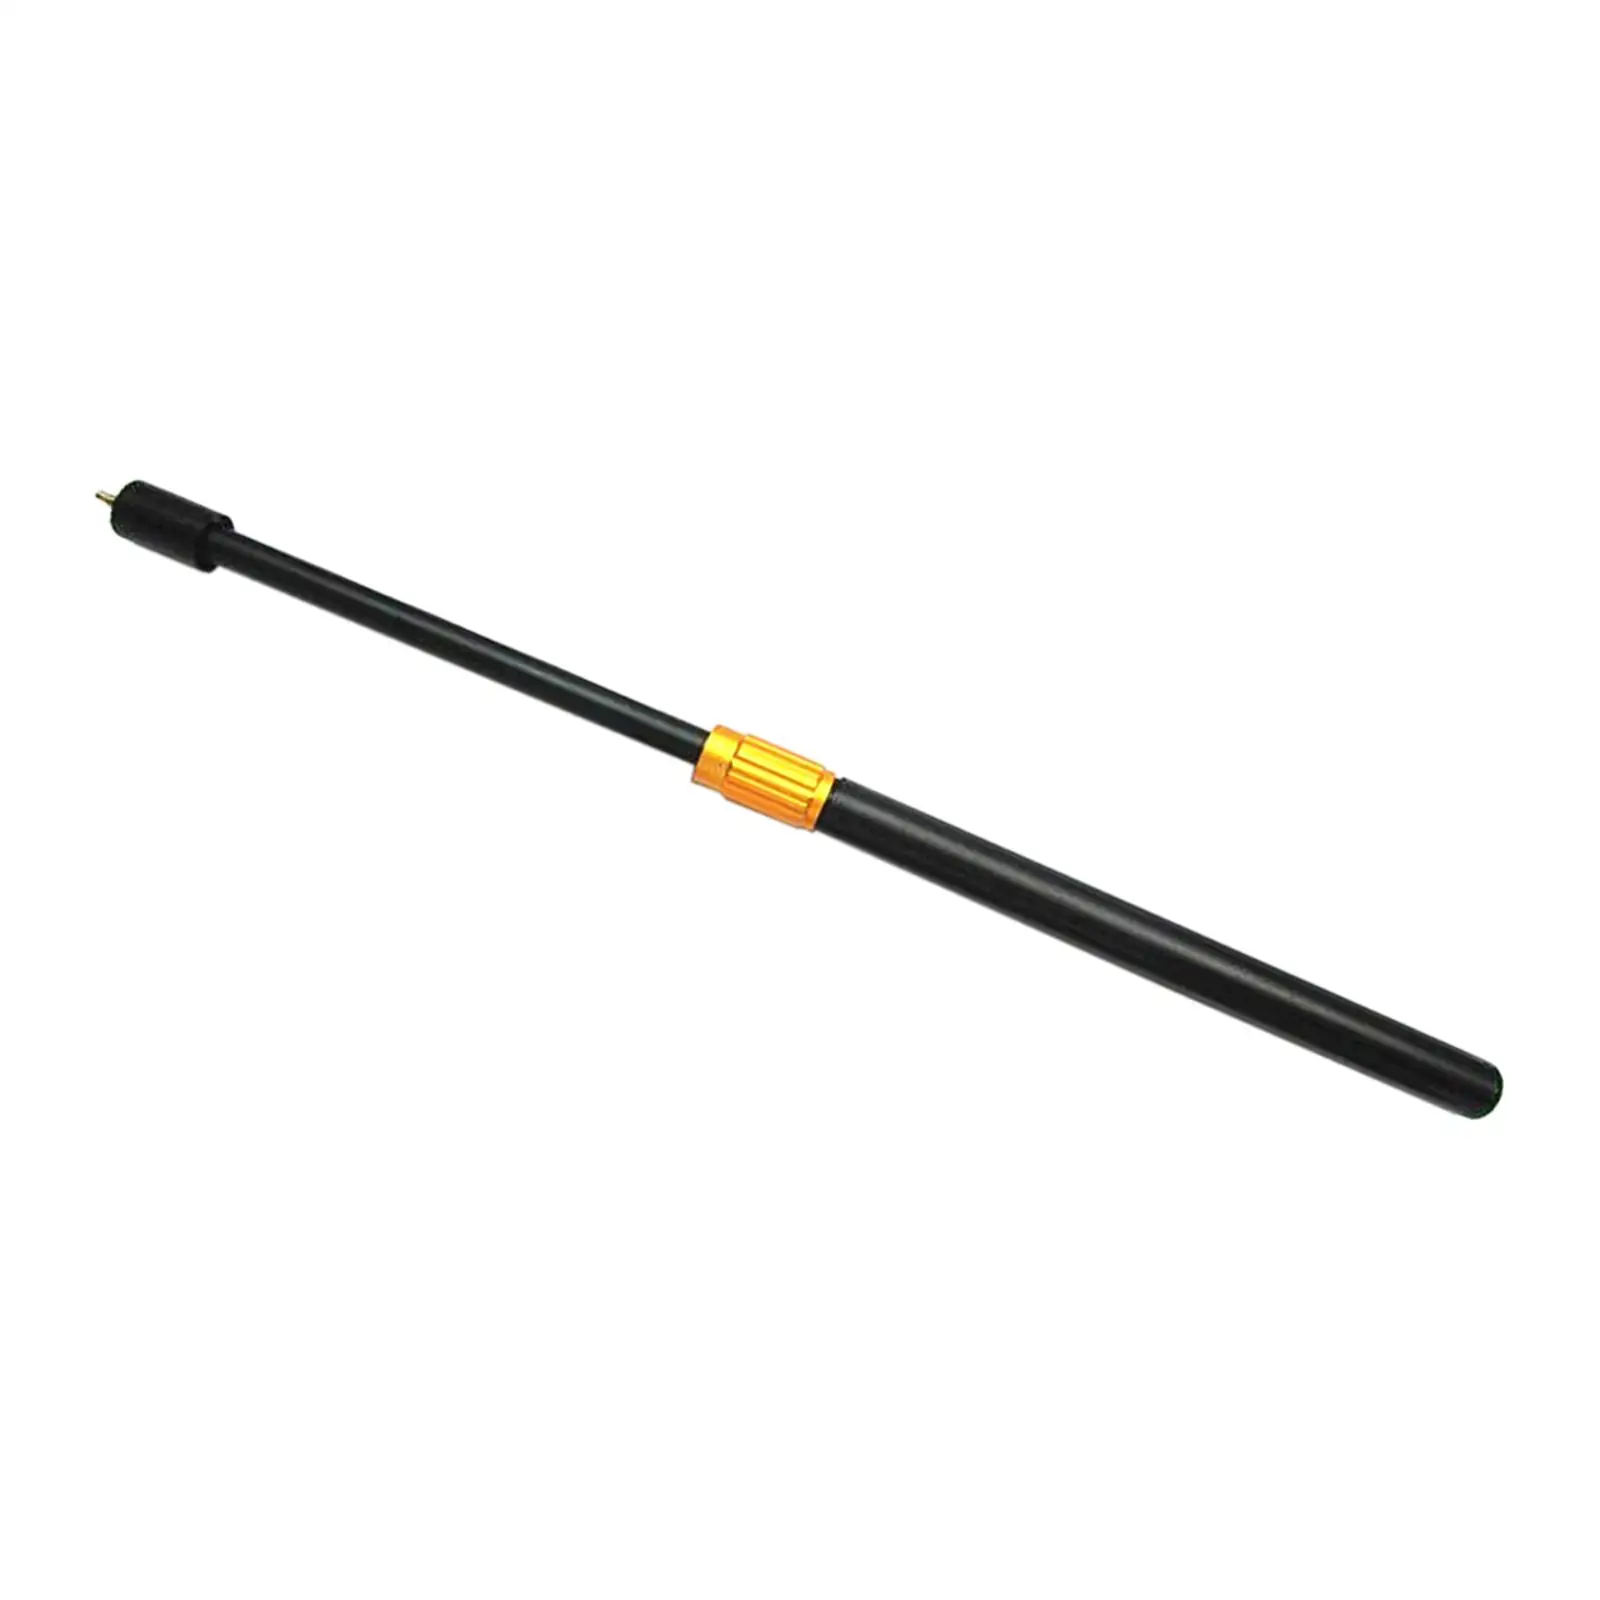 Pool Cue Extender Telescopic Billiard Connect Shaft Weights Replacement Billiards Cue Extension for Billiard Beginners Practice